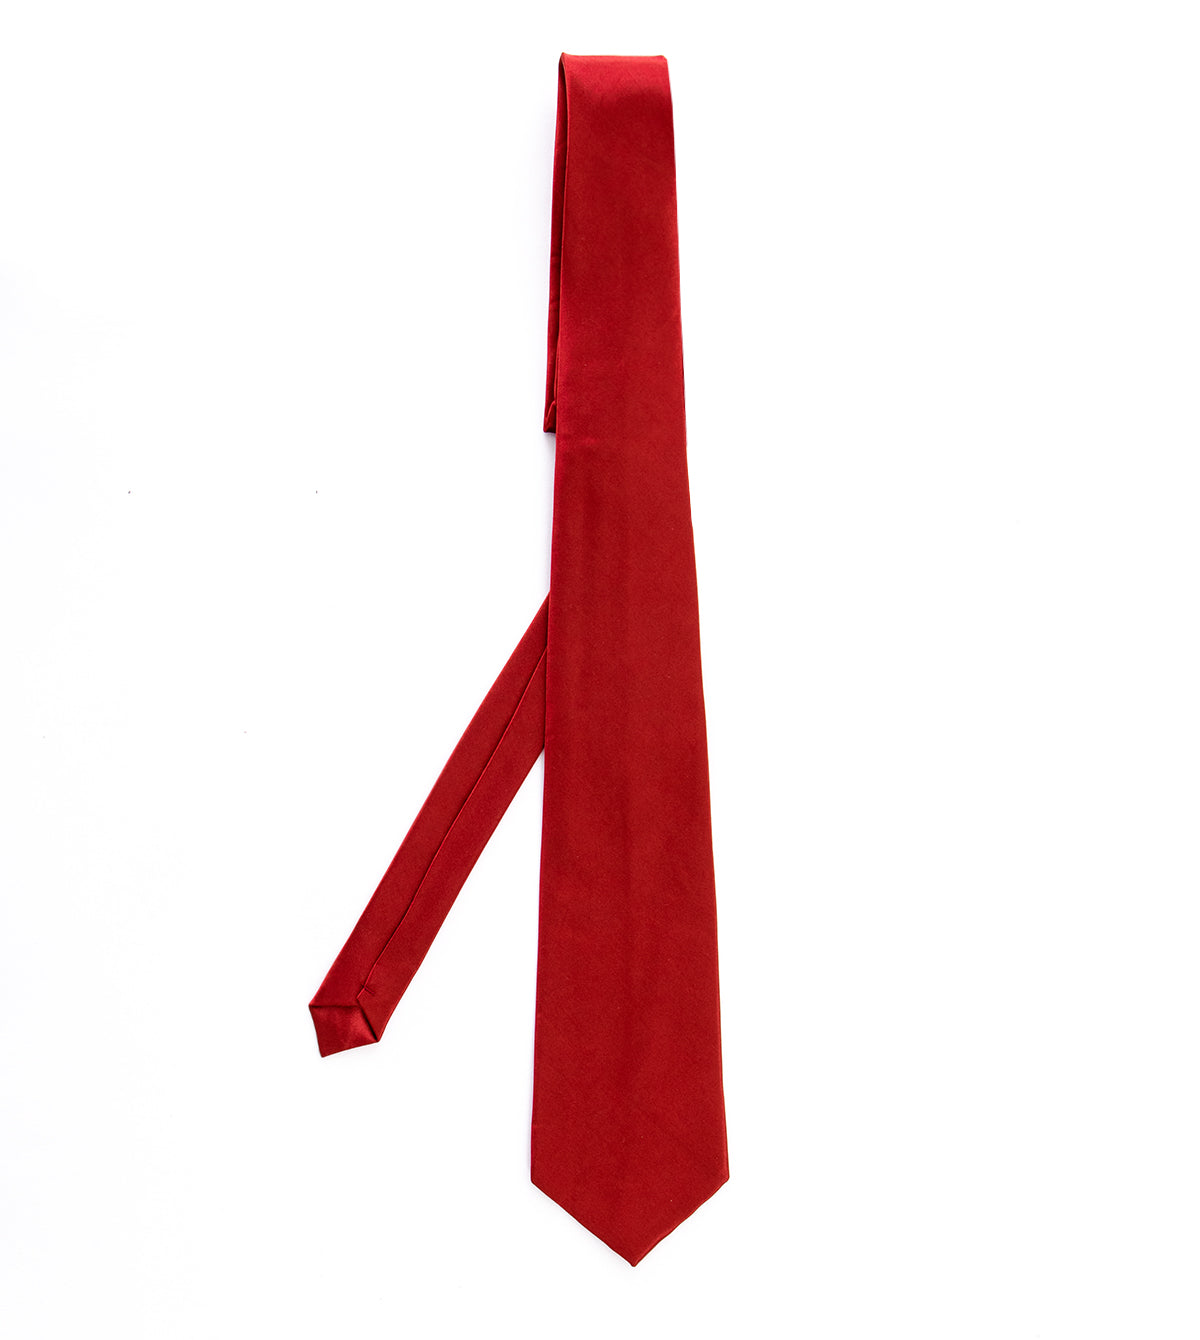 Unisex Men's Tie Elegant Ceremony Casual Basic Red Satin GIOSAL-CP1029A